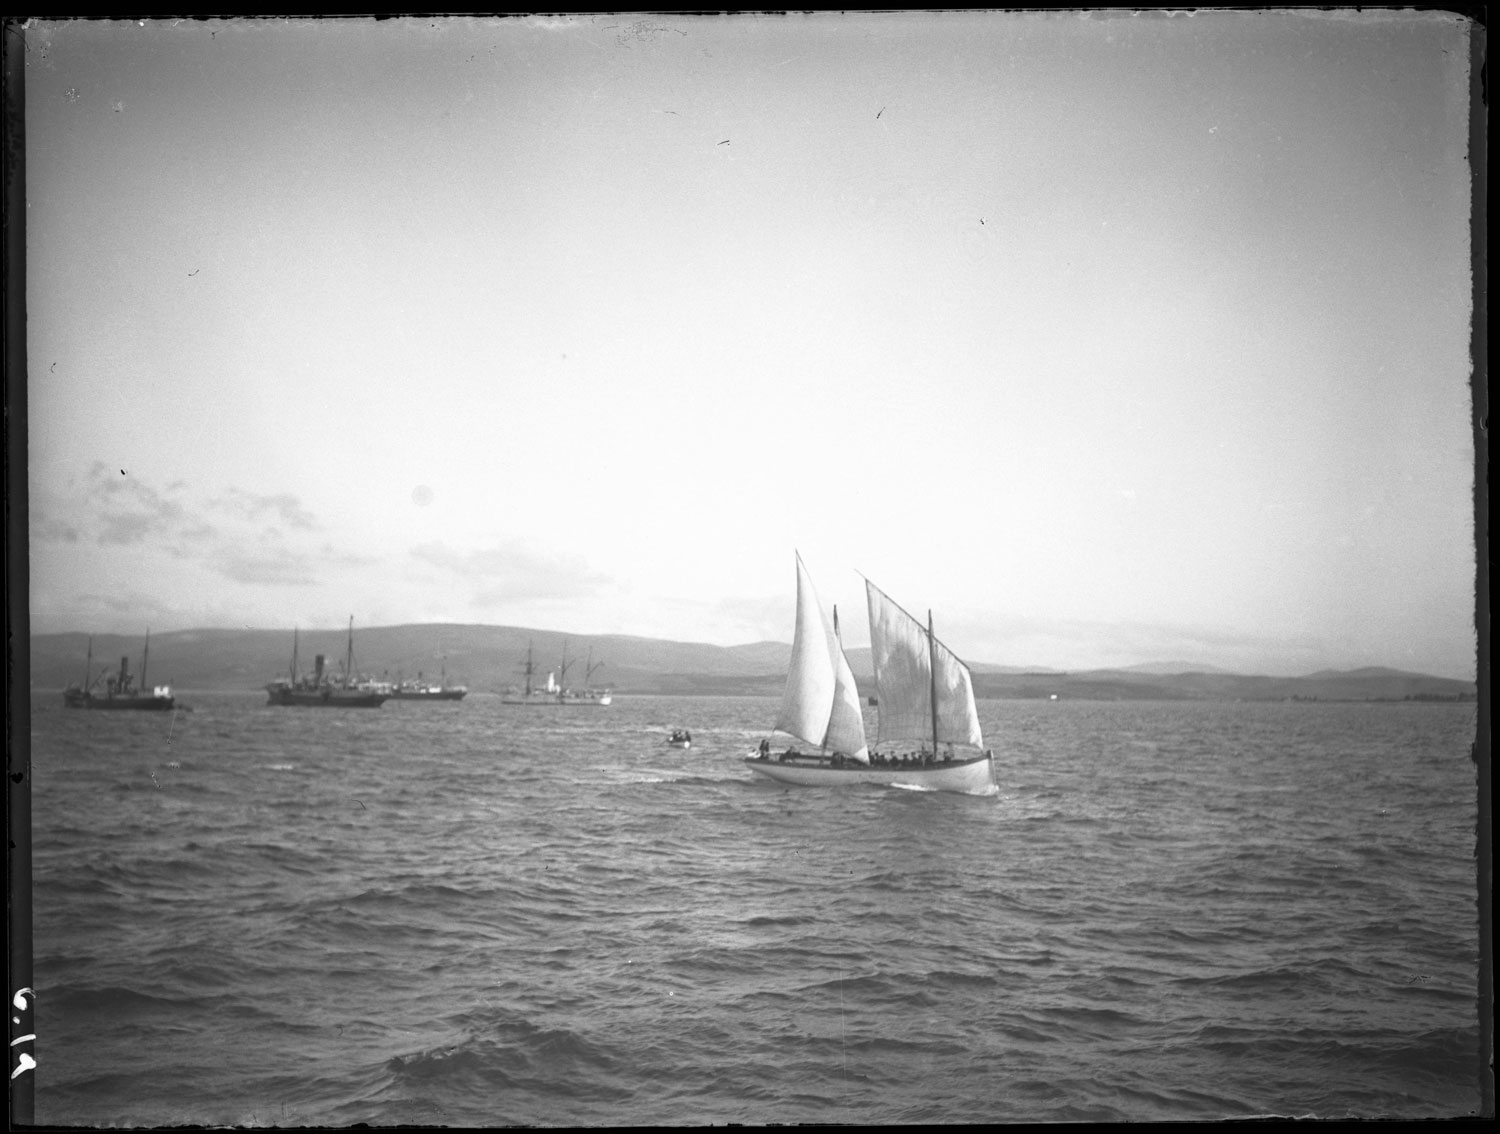 A number of ships, sailboats, and rowboats on the water